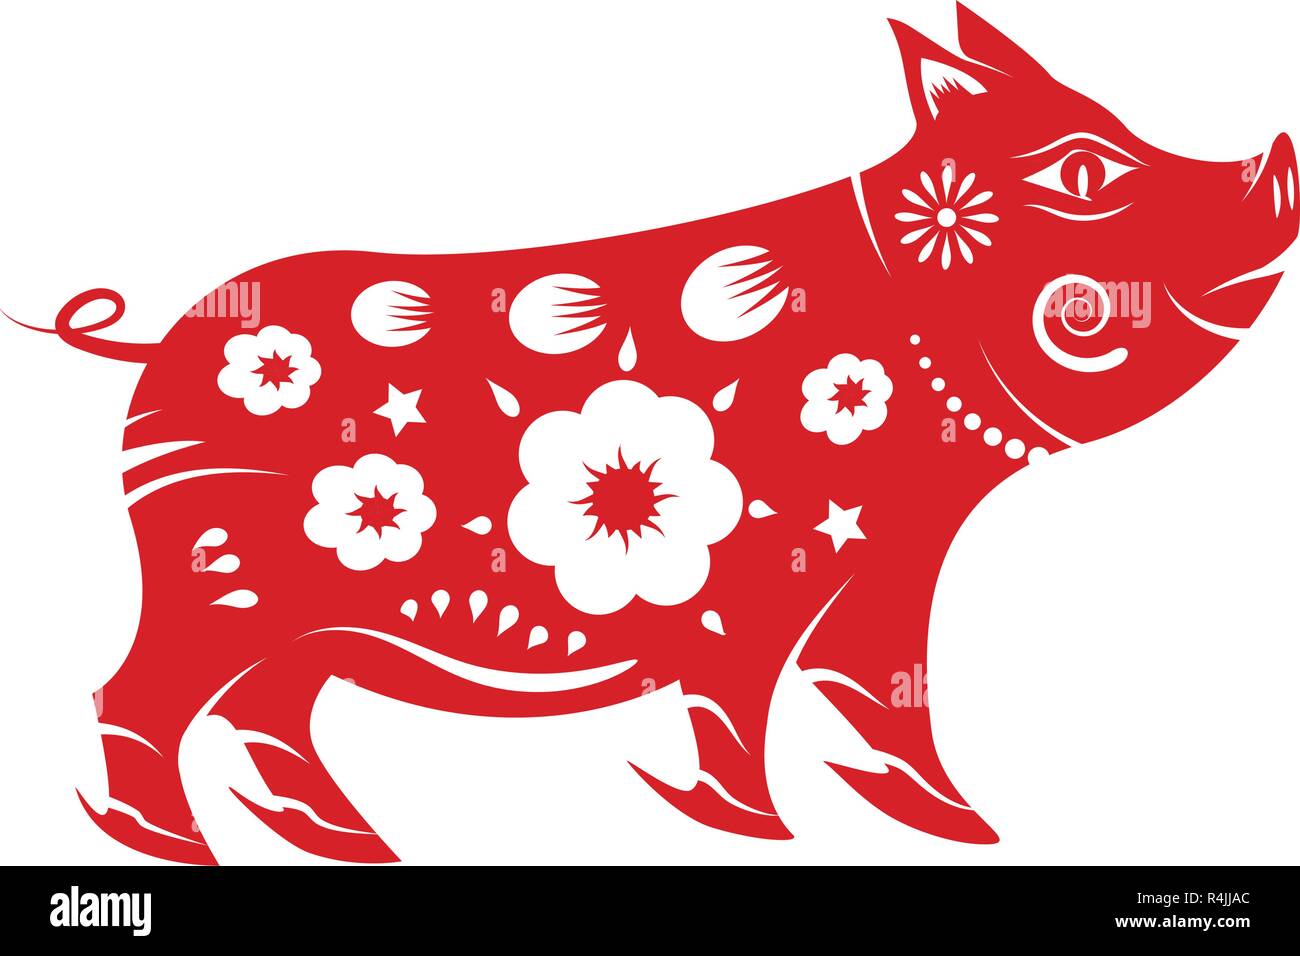 Pig zodiac. Chinese new year 2019 concept. Paper art and graphic design theme. Stock Vector